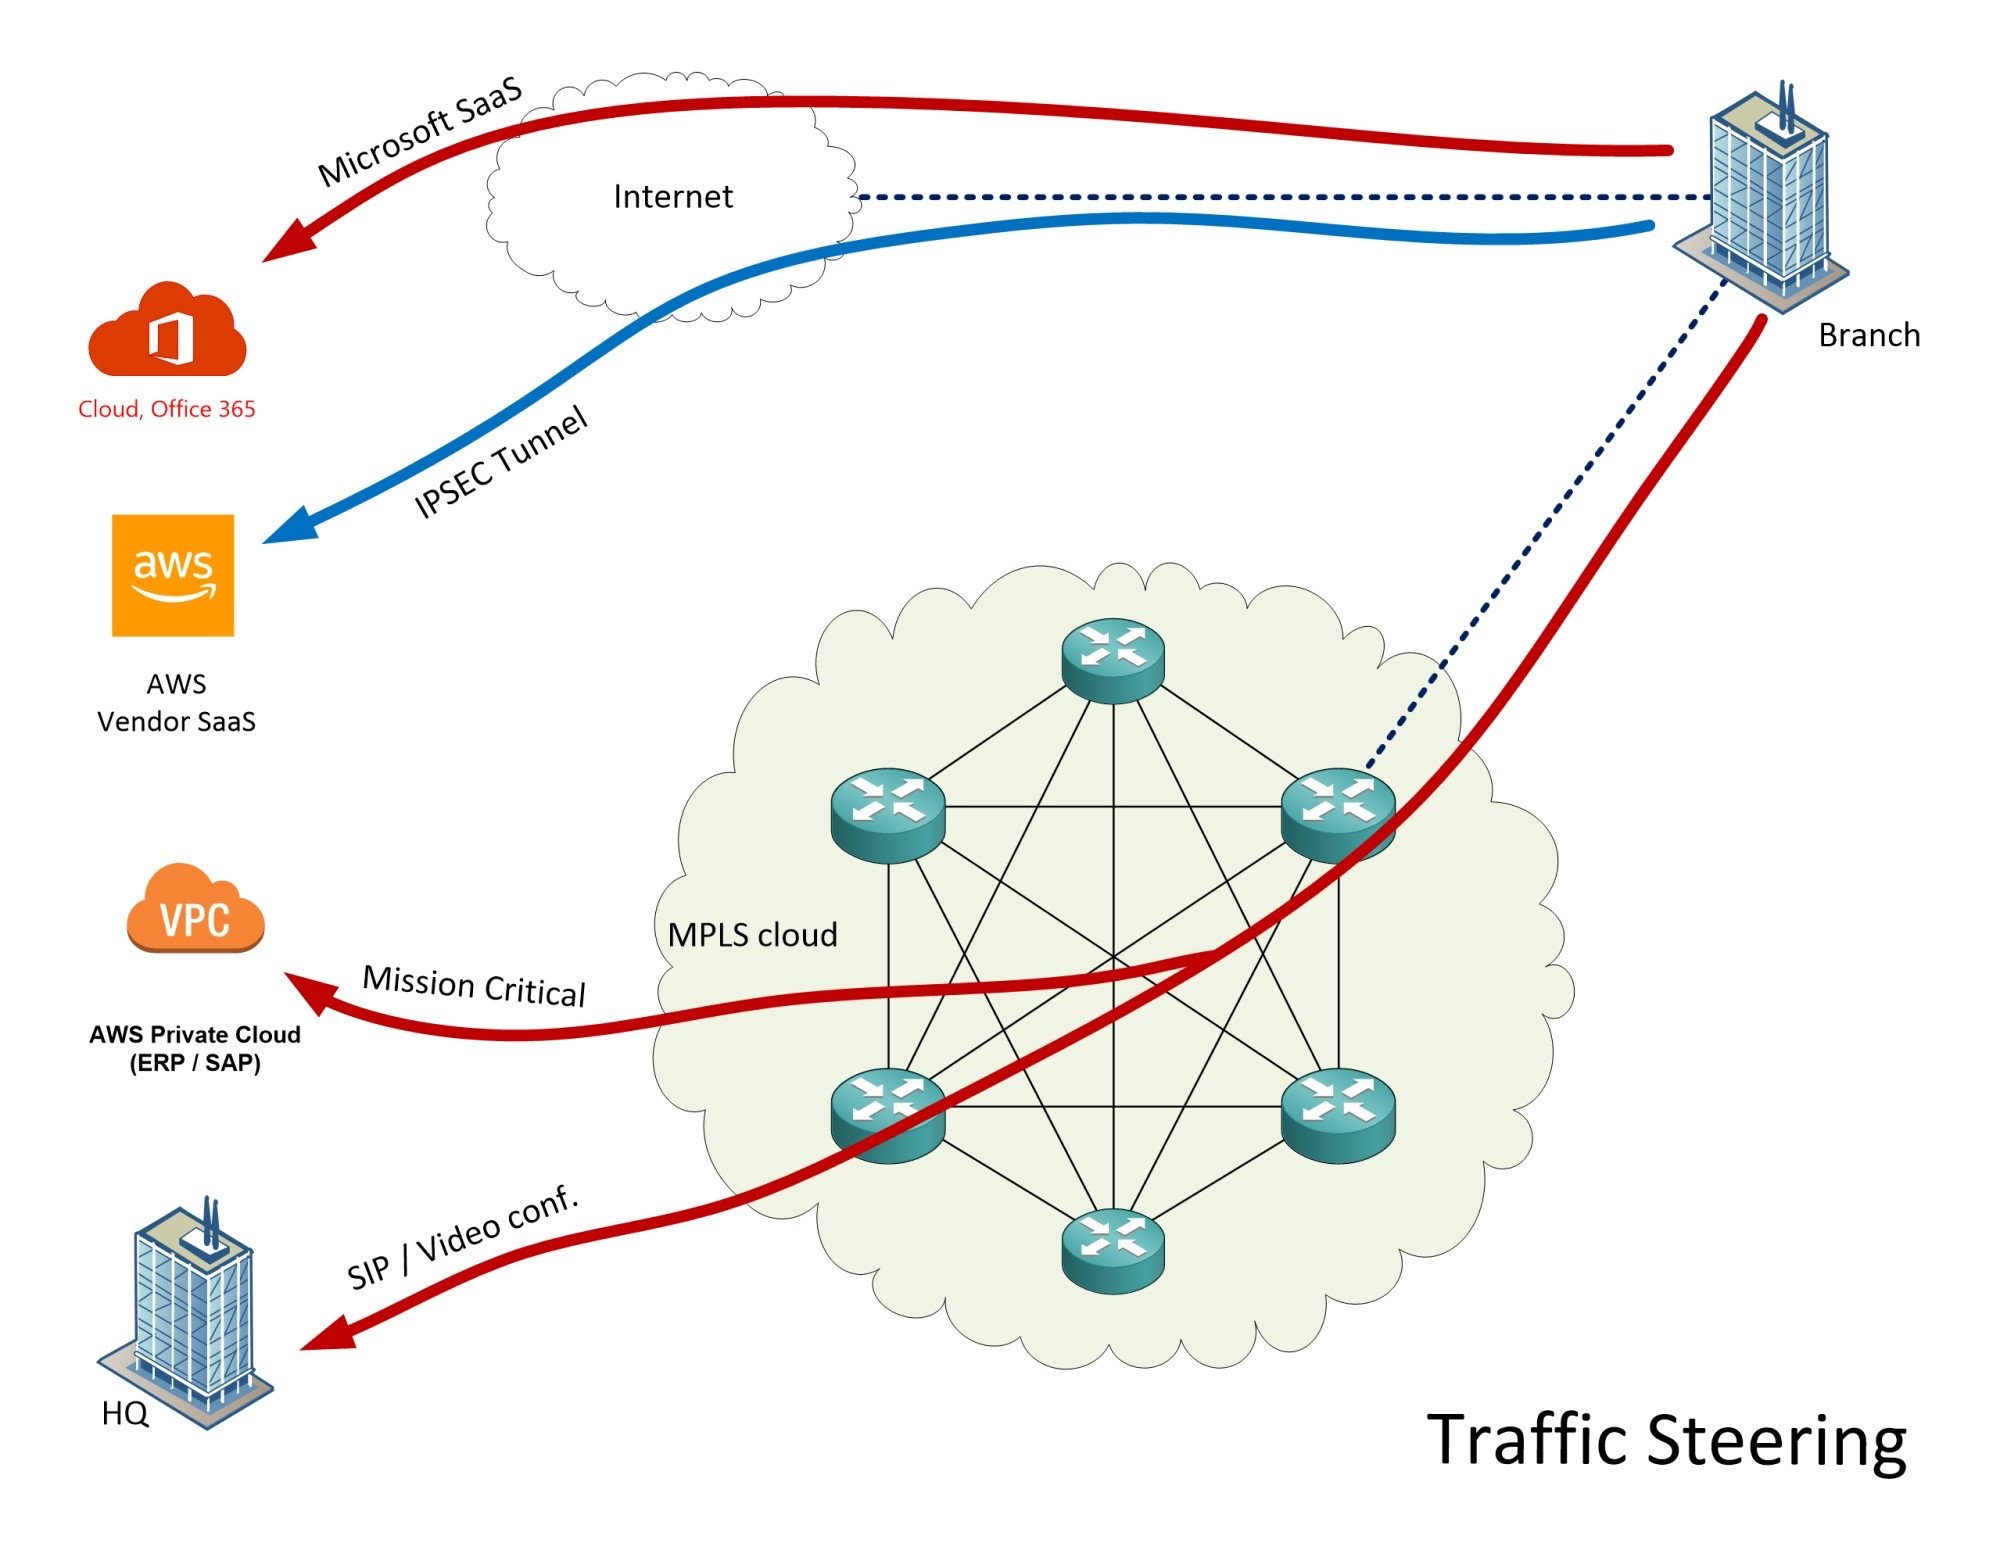 SD WAN requirements and traffic steering